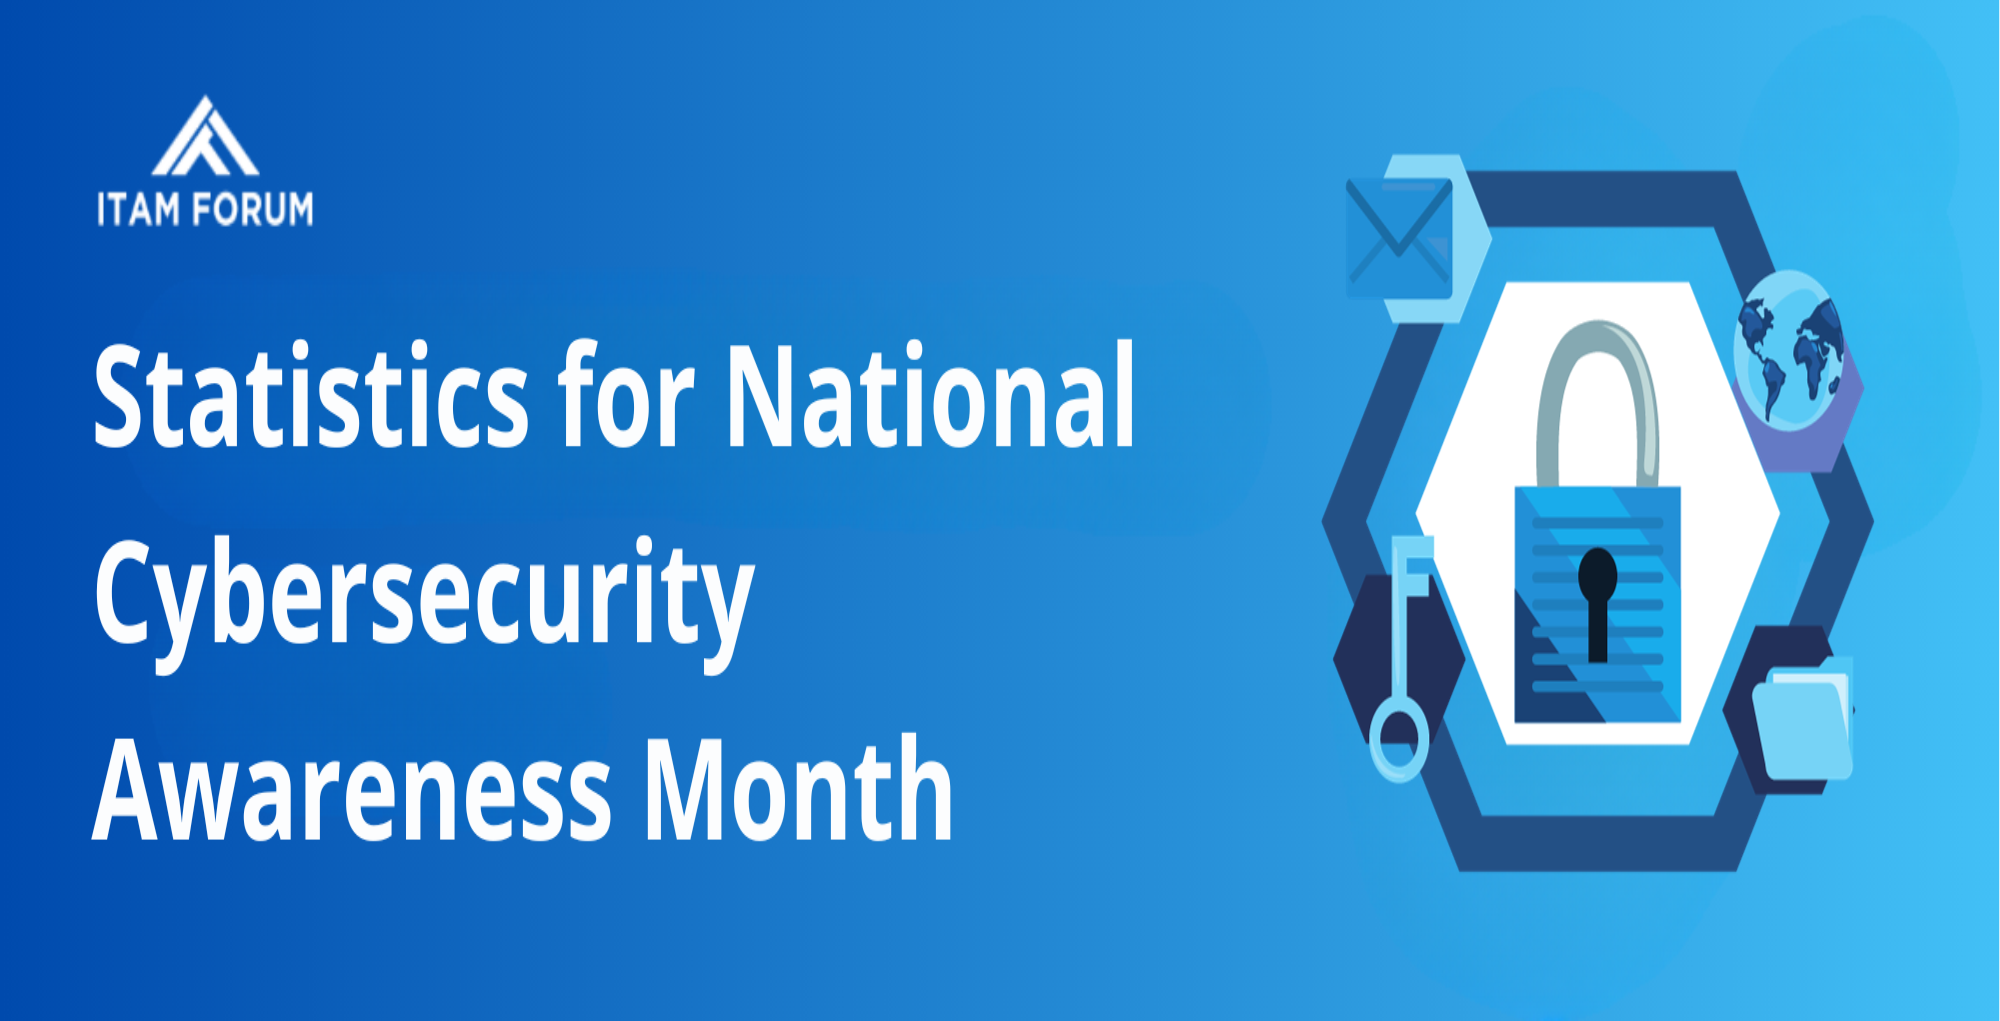 Statistics for National Cybersecurity Awareness Month